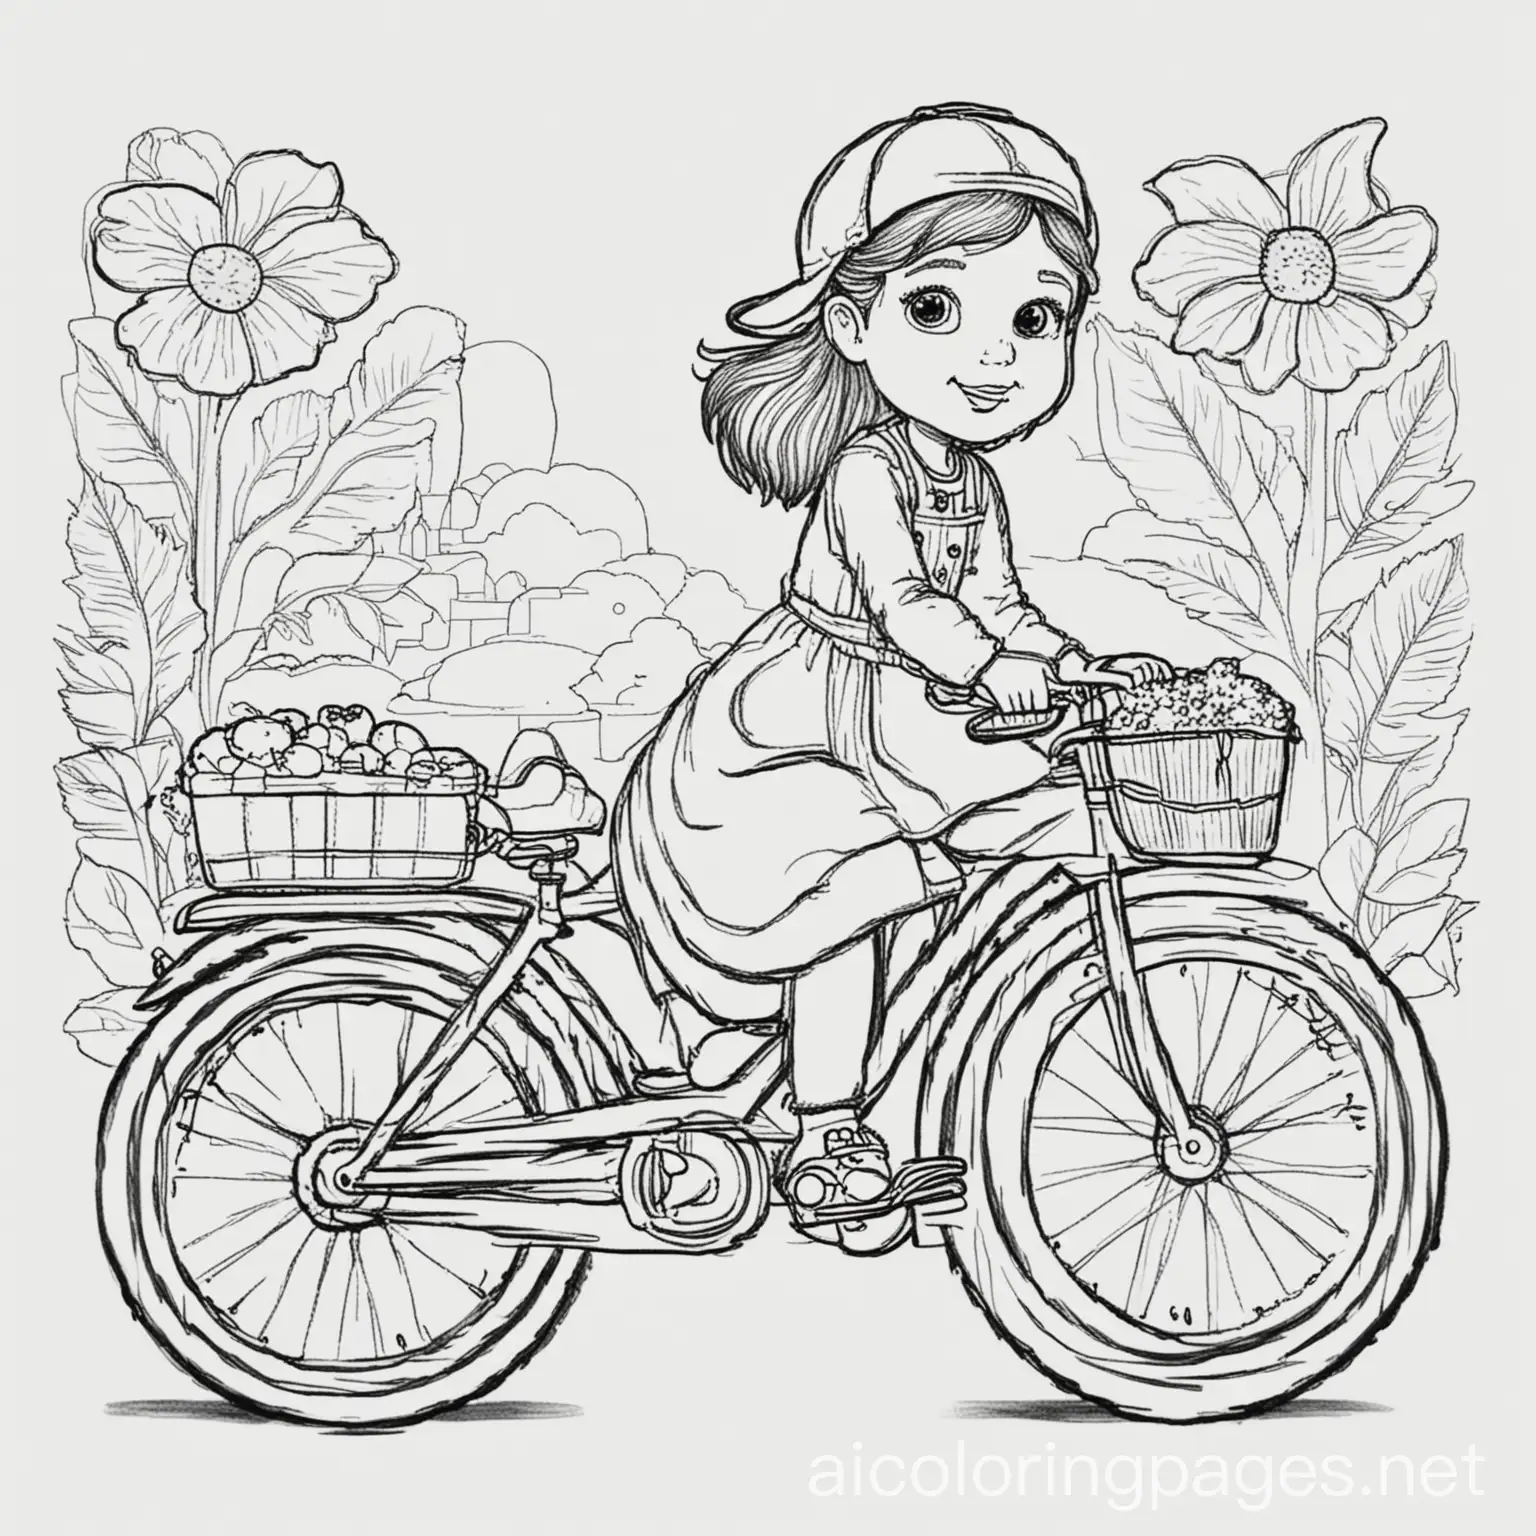 a country girl in a bike, Coloring Page, black and white, line art, white background, Simplicity, Ample White Space. The background of the coloring page is plain white to make it easy for young children to color within the lines. The outlines of all the subjects are easy to distinguish, making it simple for kids to color without too much difficulty